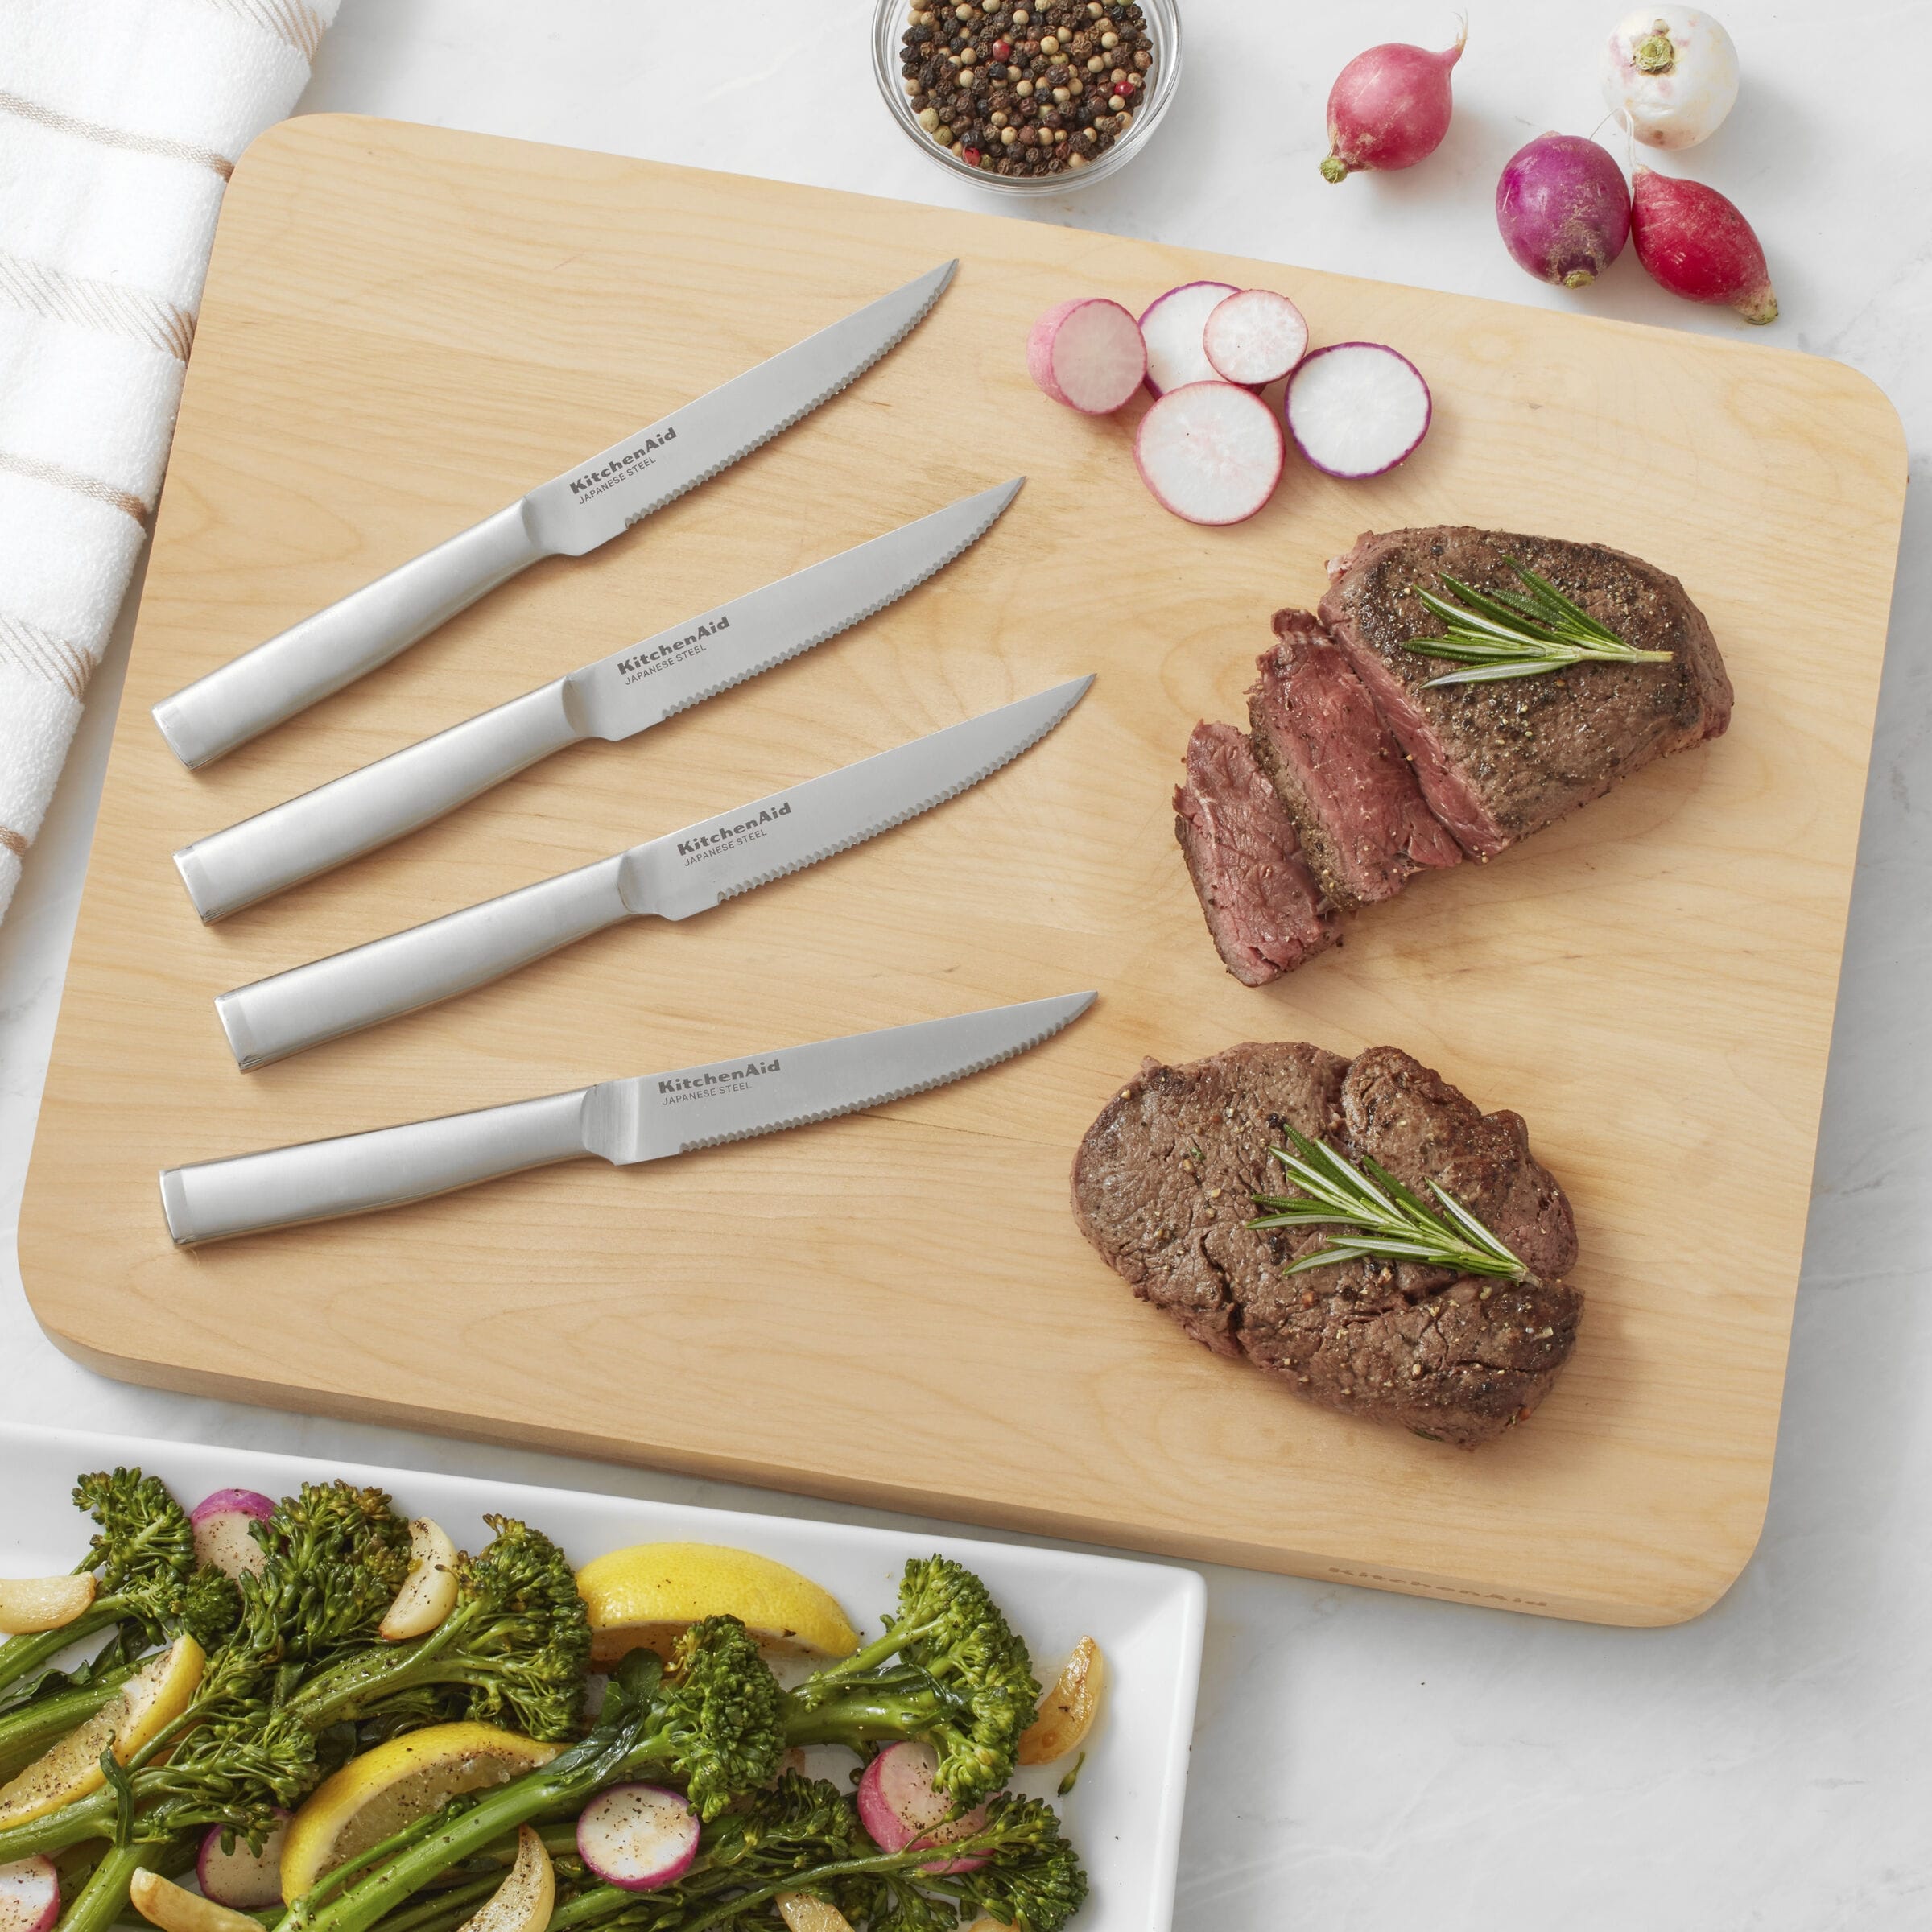 https://ak1.ostkcdn.com/images/products/is/images/direct/033c17908a5ed968c0ef87e3b1355dc35f031e98/KitchenAid-Gourmet-4-Piece-Steak-Knife-Set%2C-4.5-Inch%2C-Stainless-Steel.jpg